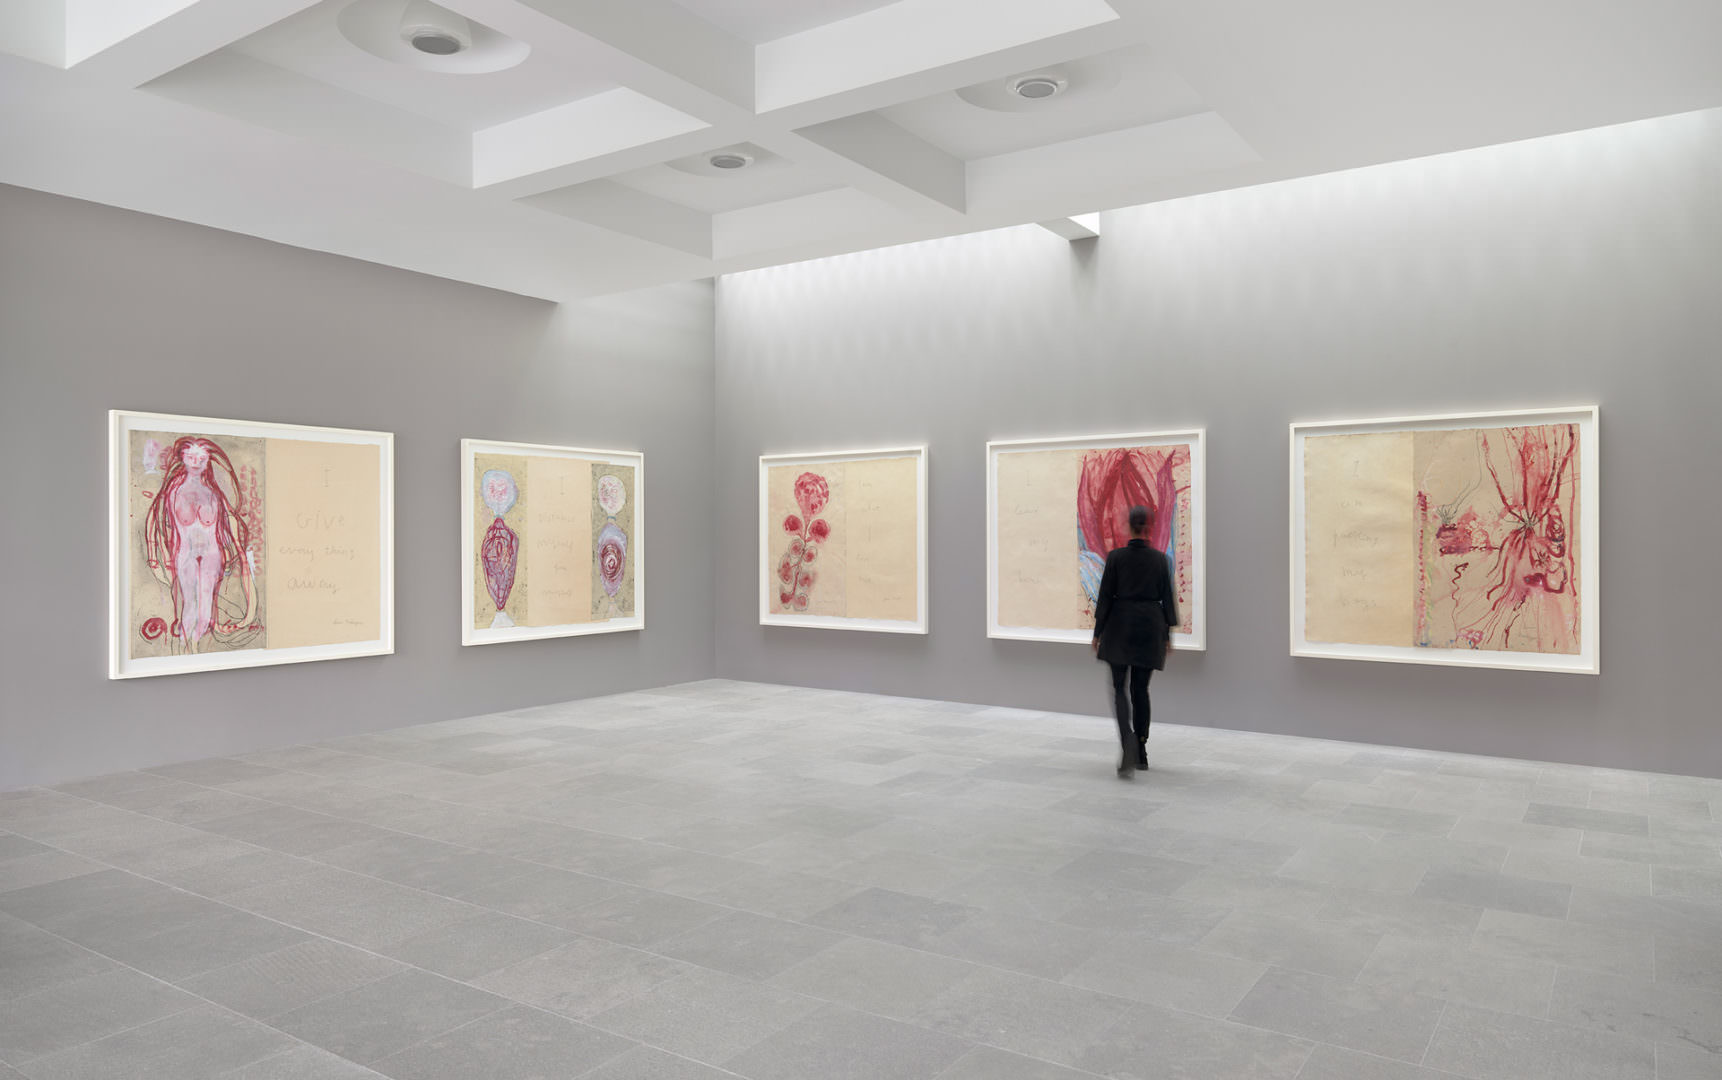 A blurred figure walks in a gray gallery space with a stone floor towards five large painted works on paper.